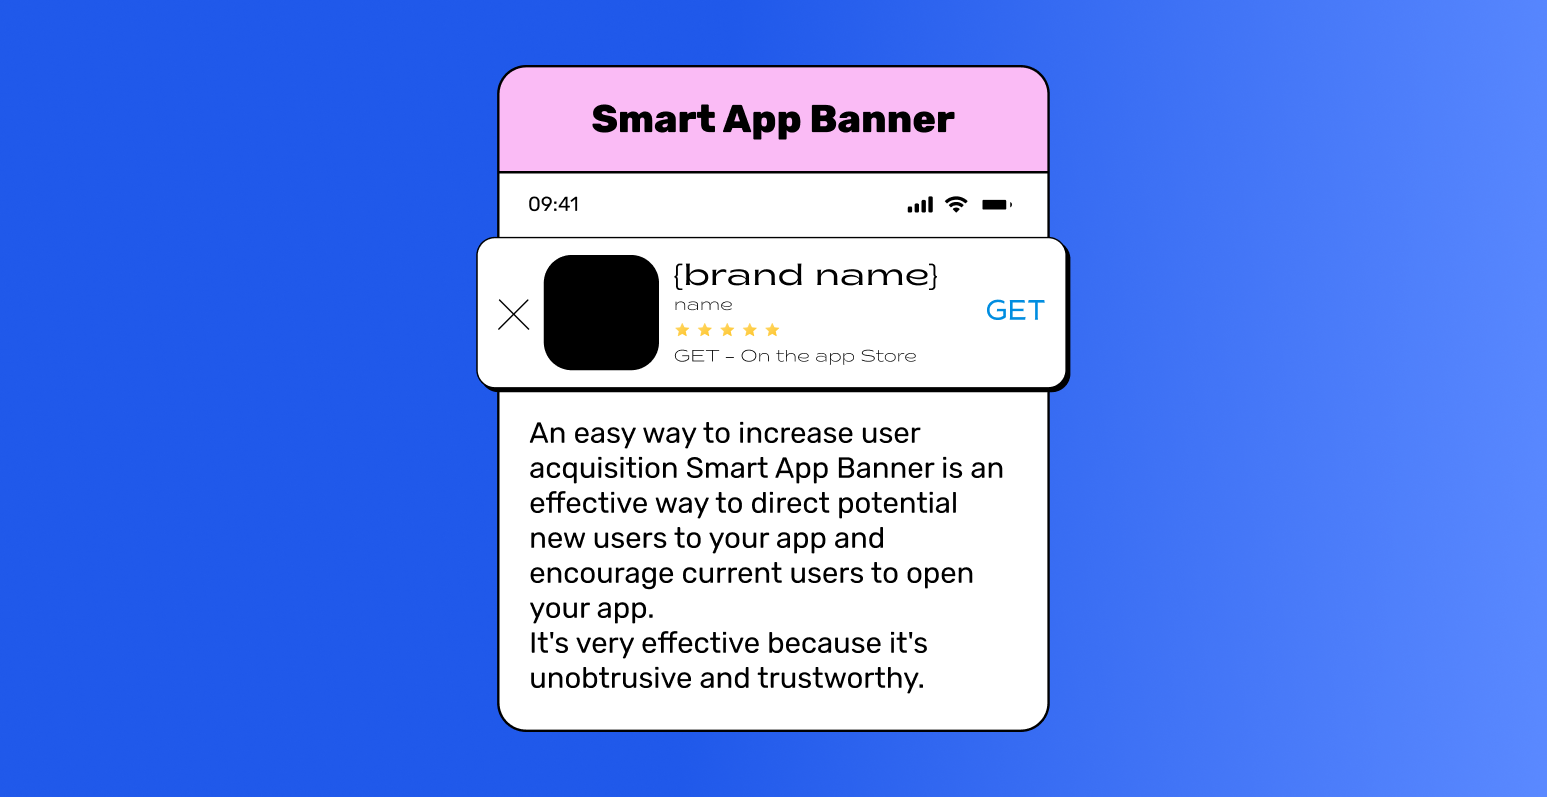 The image features a mobile website displayed in a box, with a prominent smart app banner highlighted above it. The banner shows how it will appear on the mobile website after converting your Shopify store into a mobile app. Below the banner, there is a brief description of what a smart app banner is, all still within the frame that simulates the mobile website.